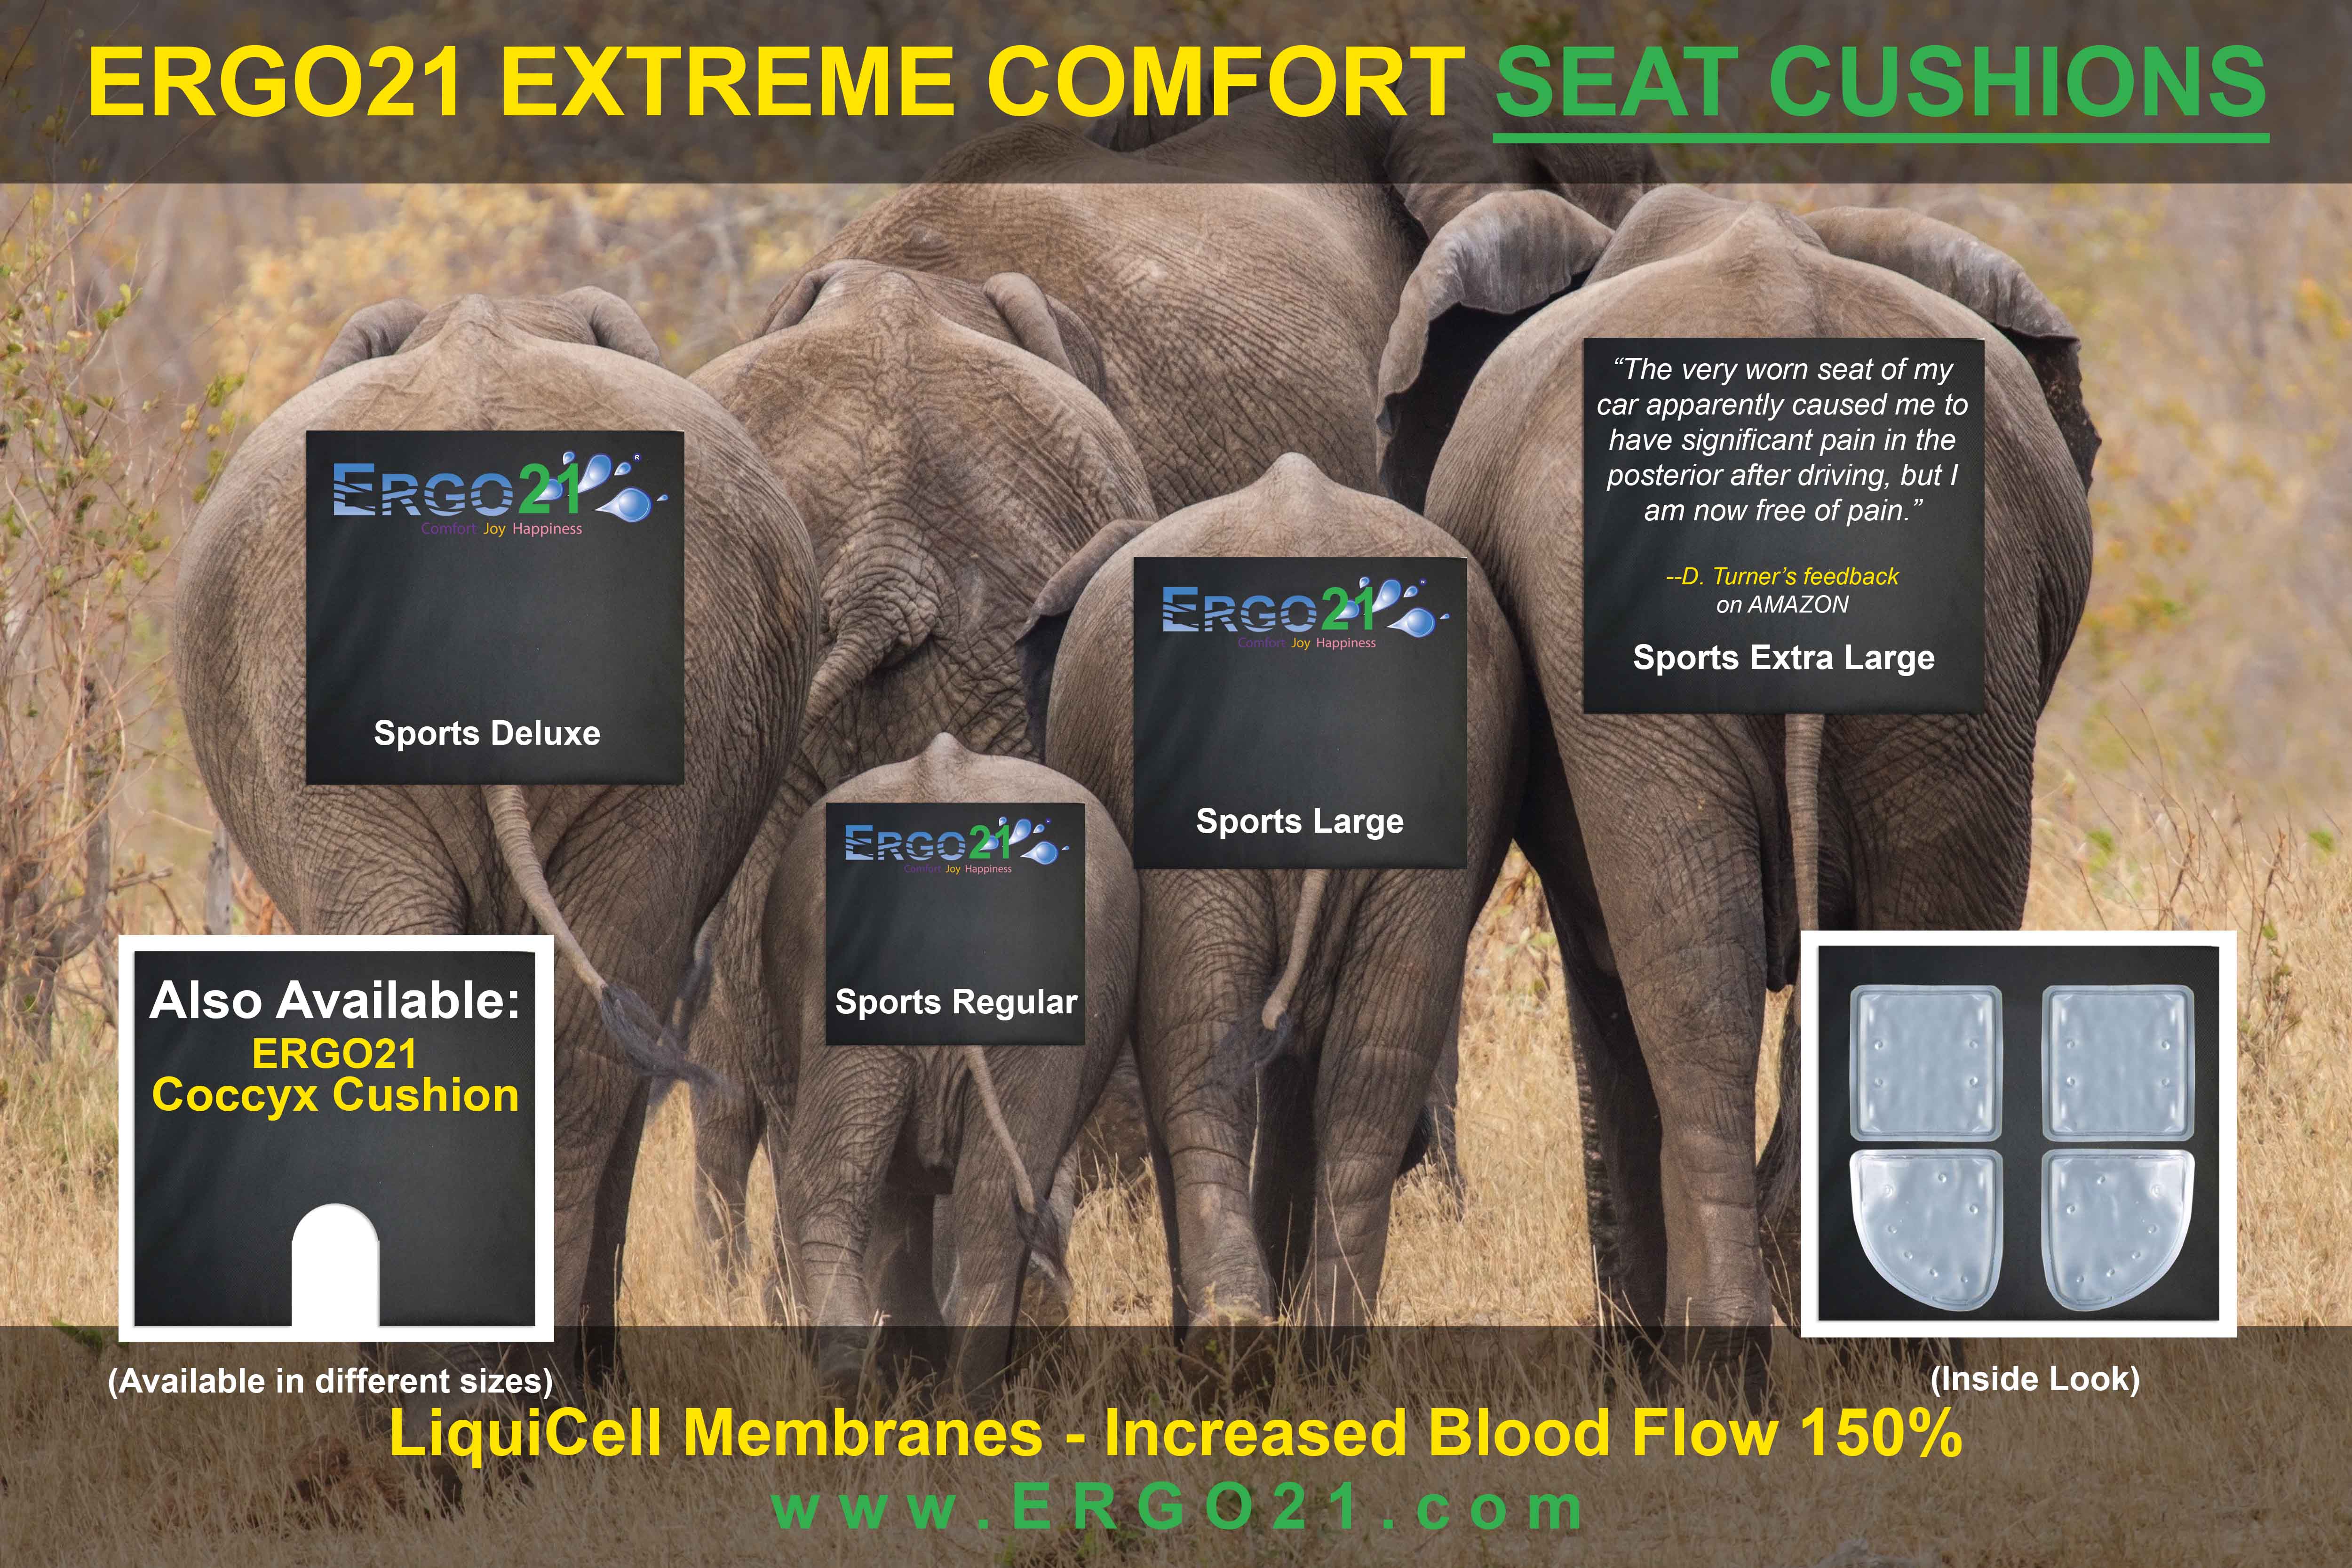 Ergo21 Seat Cushions with LiquiCell Technology, Available in